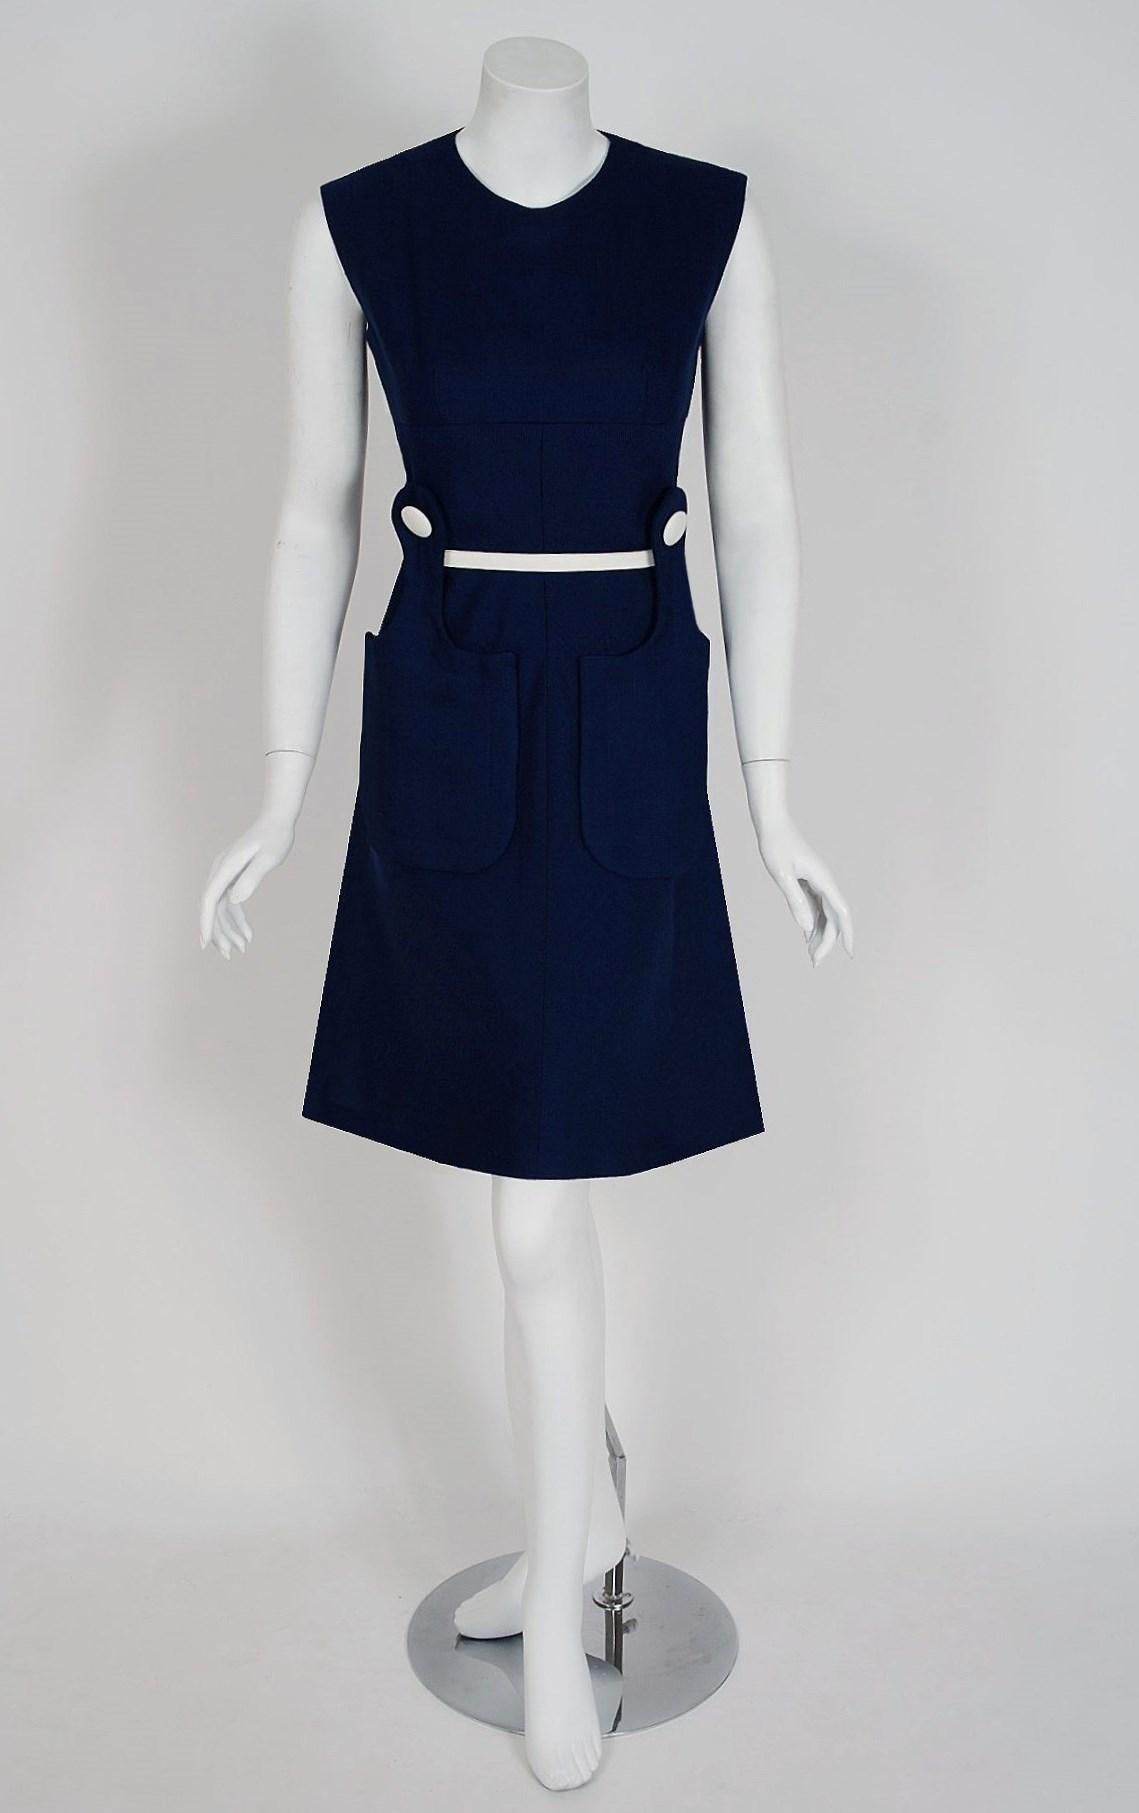 Spectacular mid 1960's Pierre Cardin designer dress in a rich navy-blue tailored linen. In 1951 Cardin opened his own couture house and by 1957, he started a ready-to-wear line; a bold move for a French couturier at the time. The look most